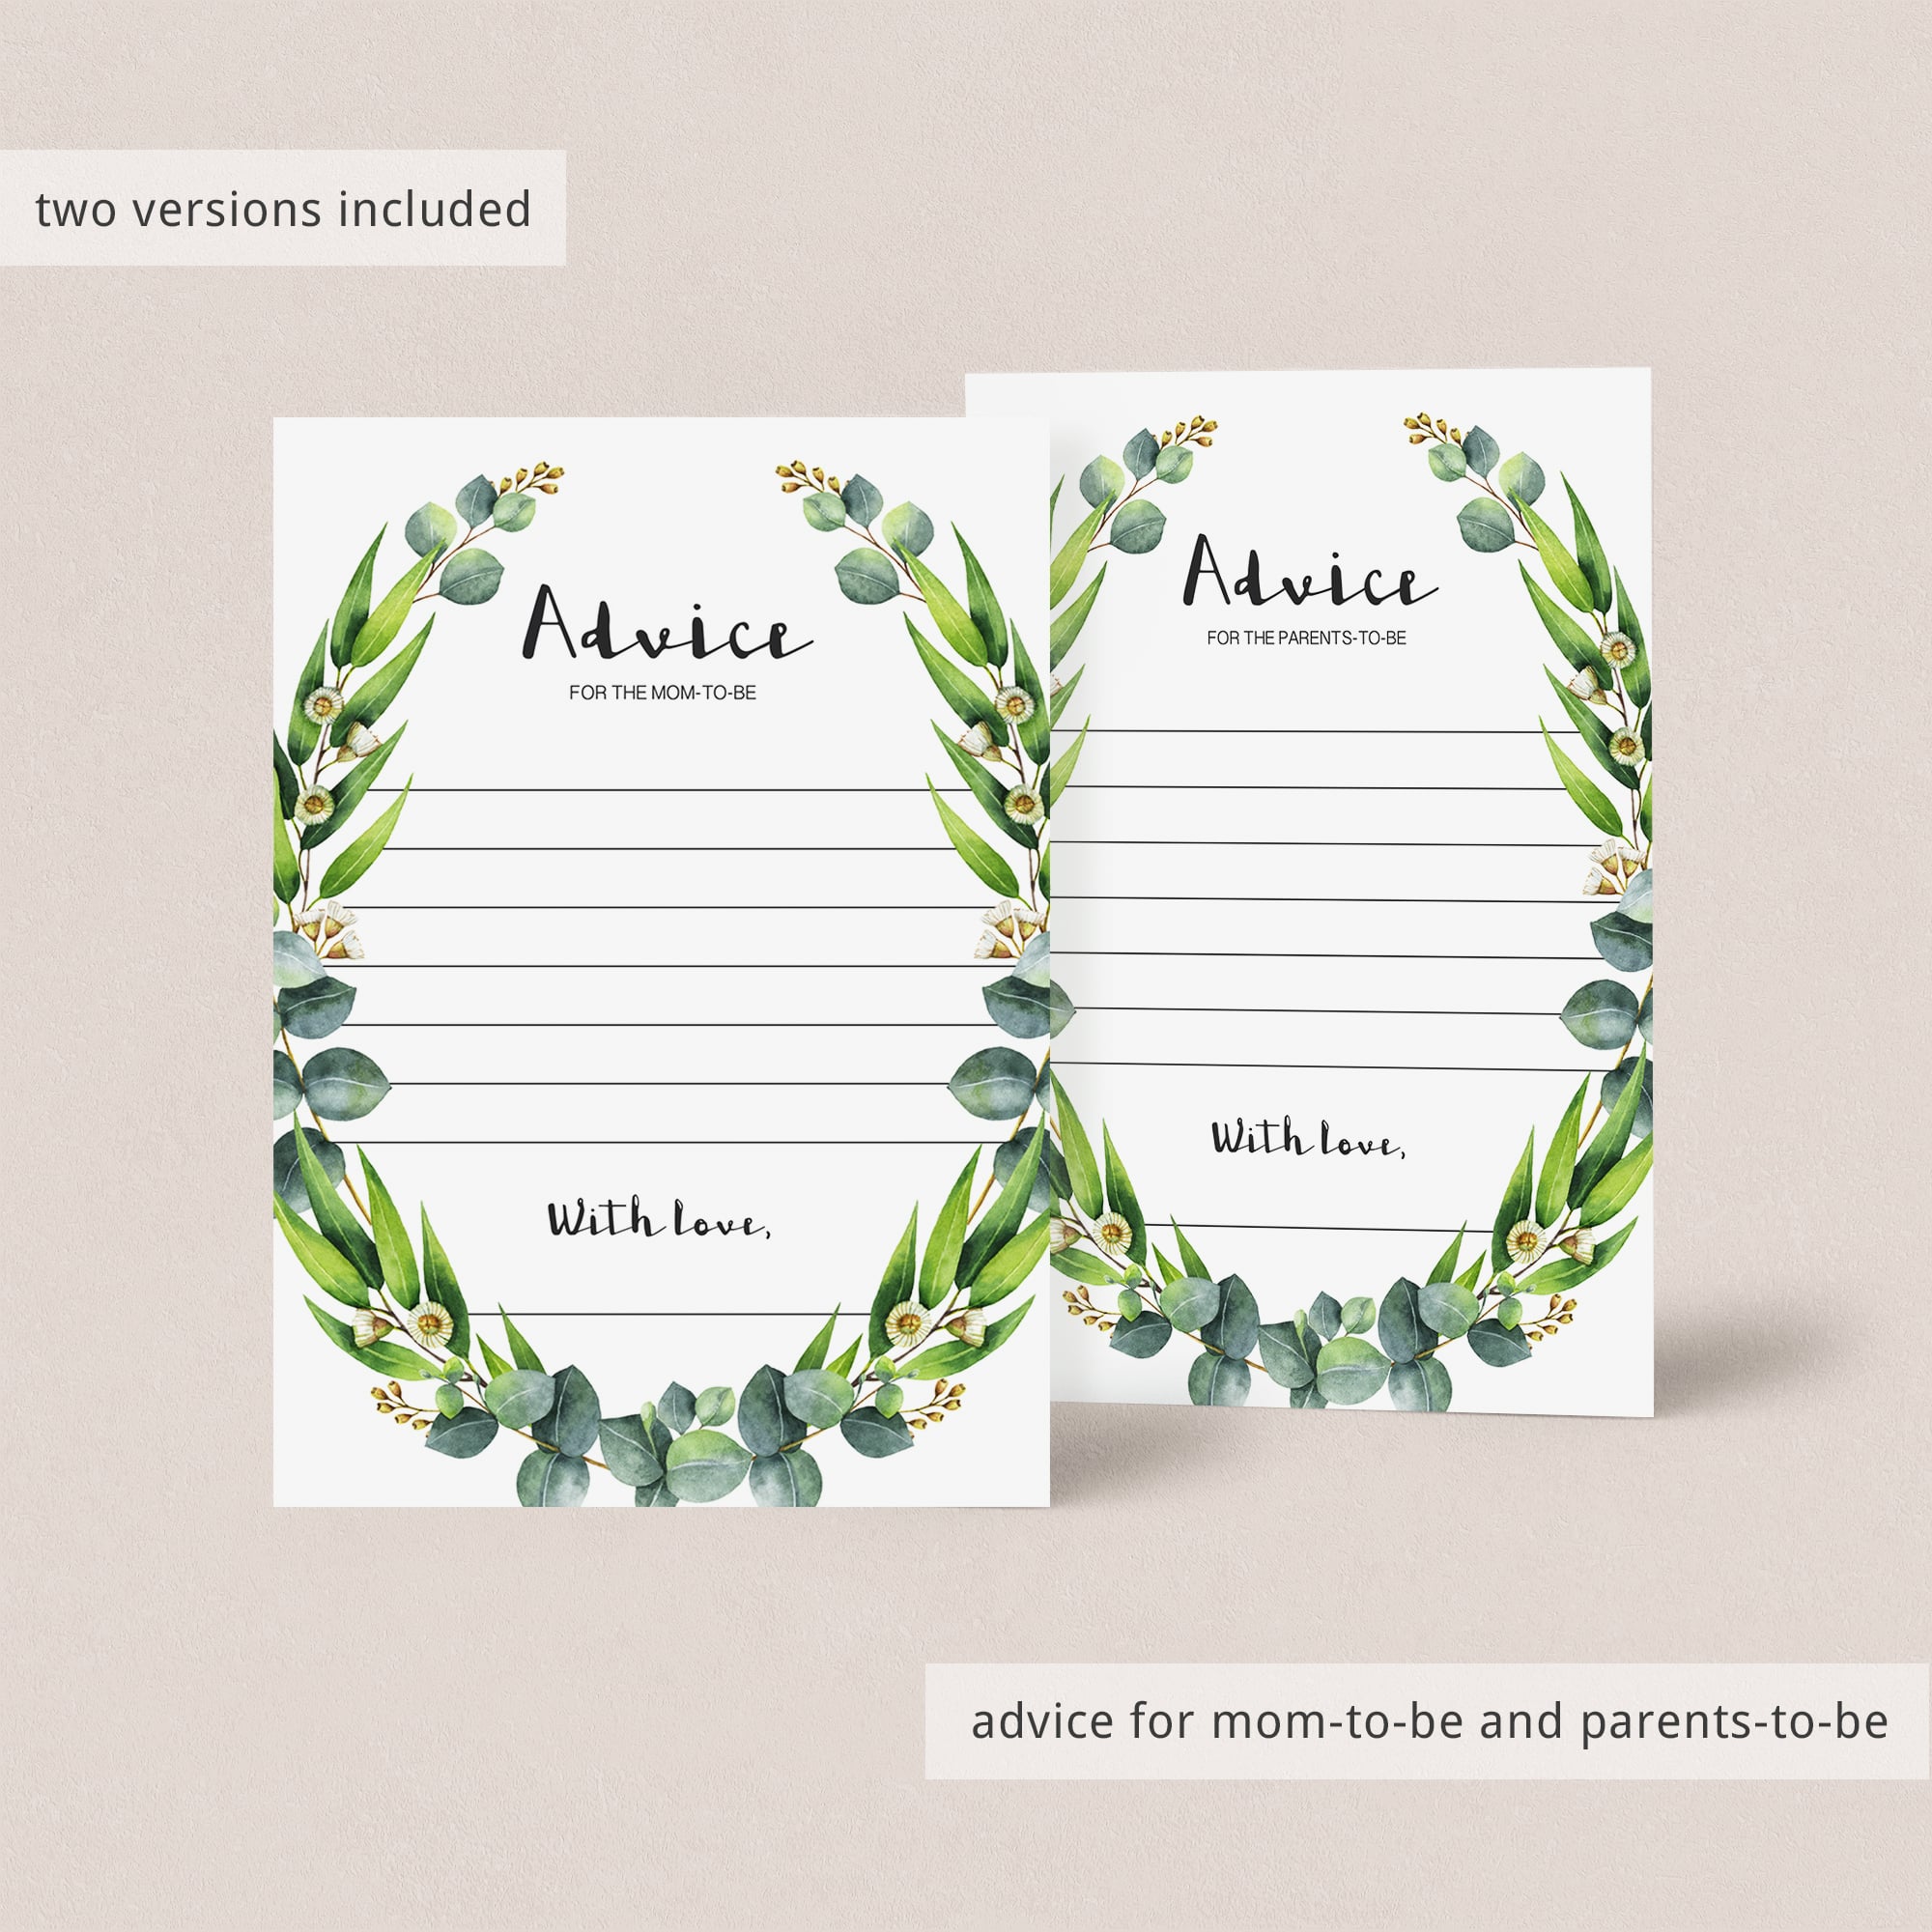 Baby shower advice cards instant download by LittleSizzle